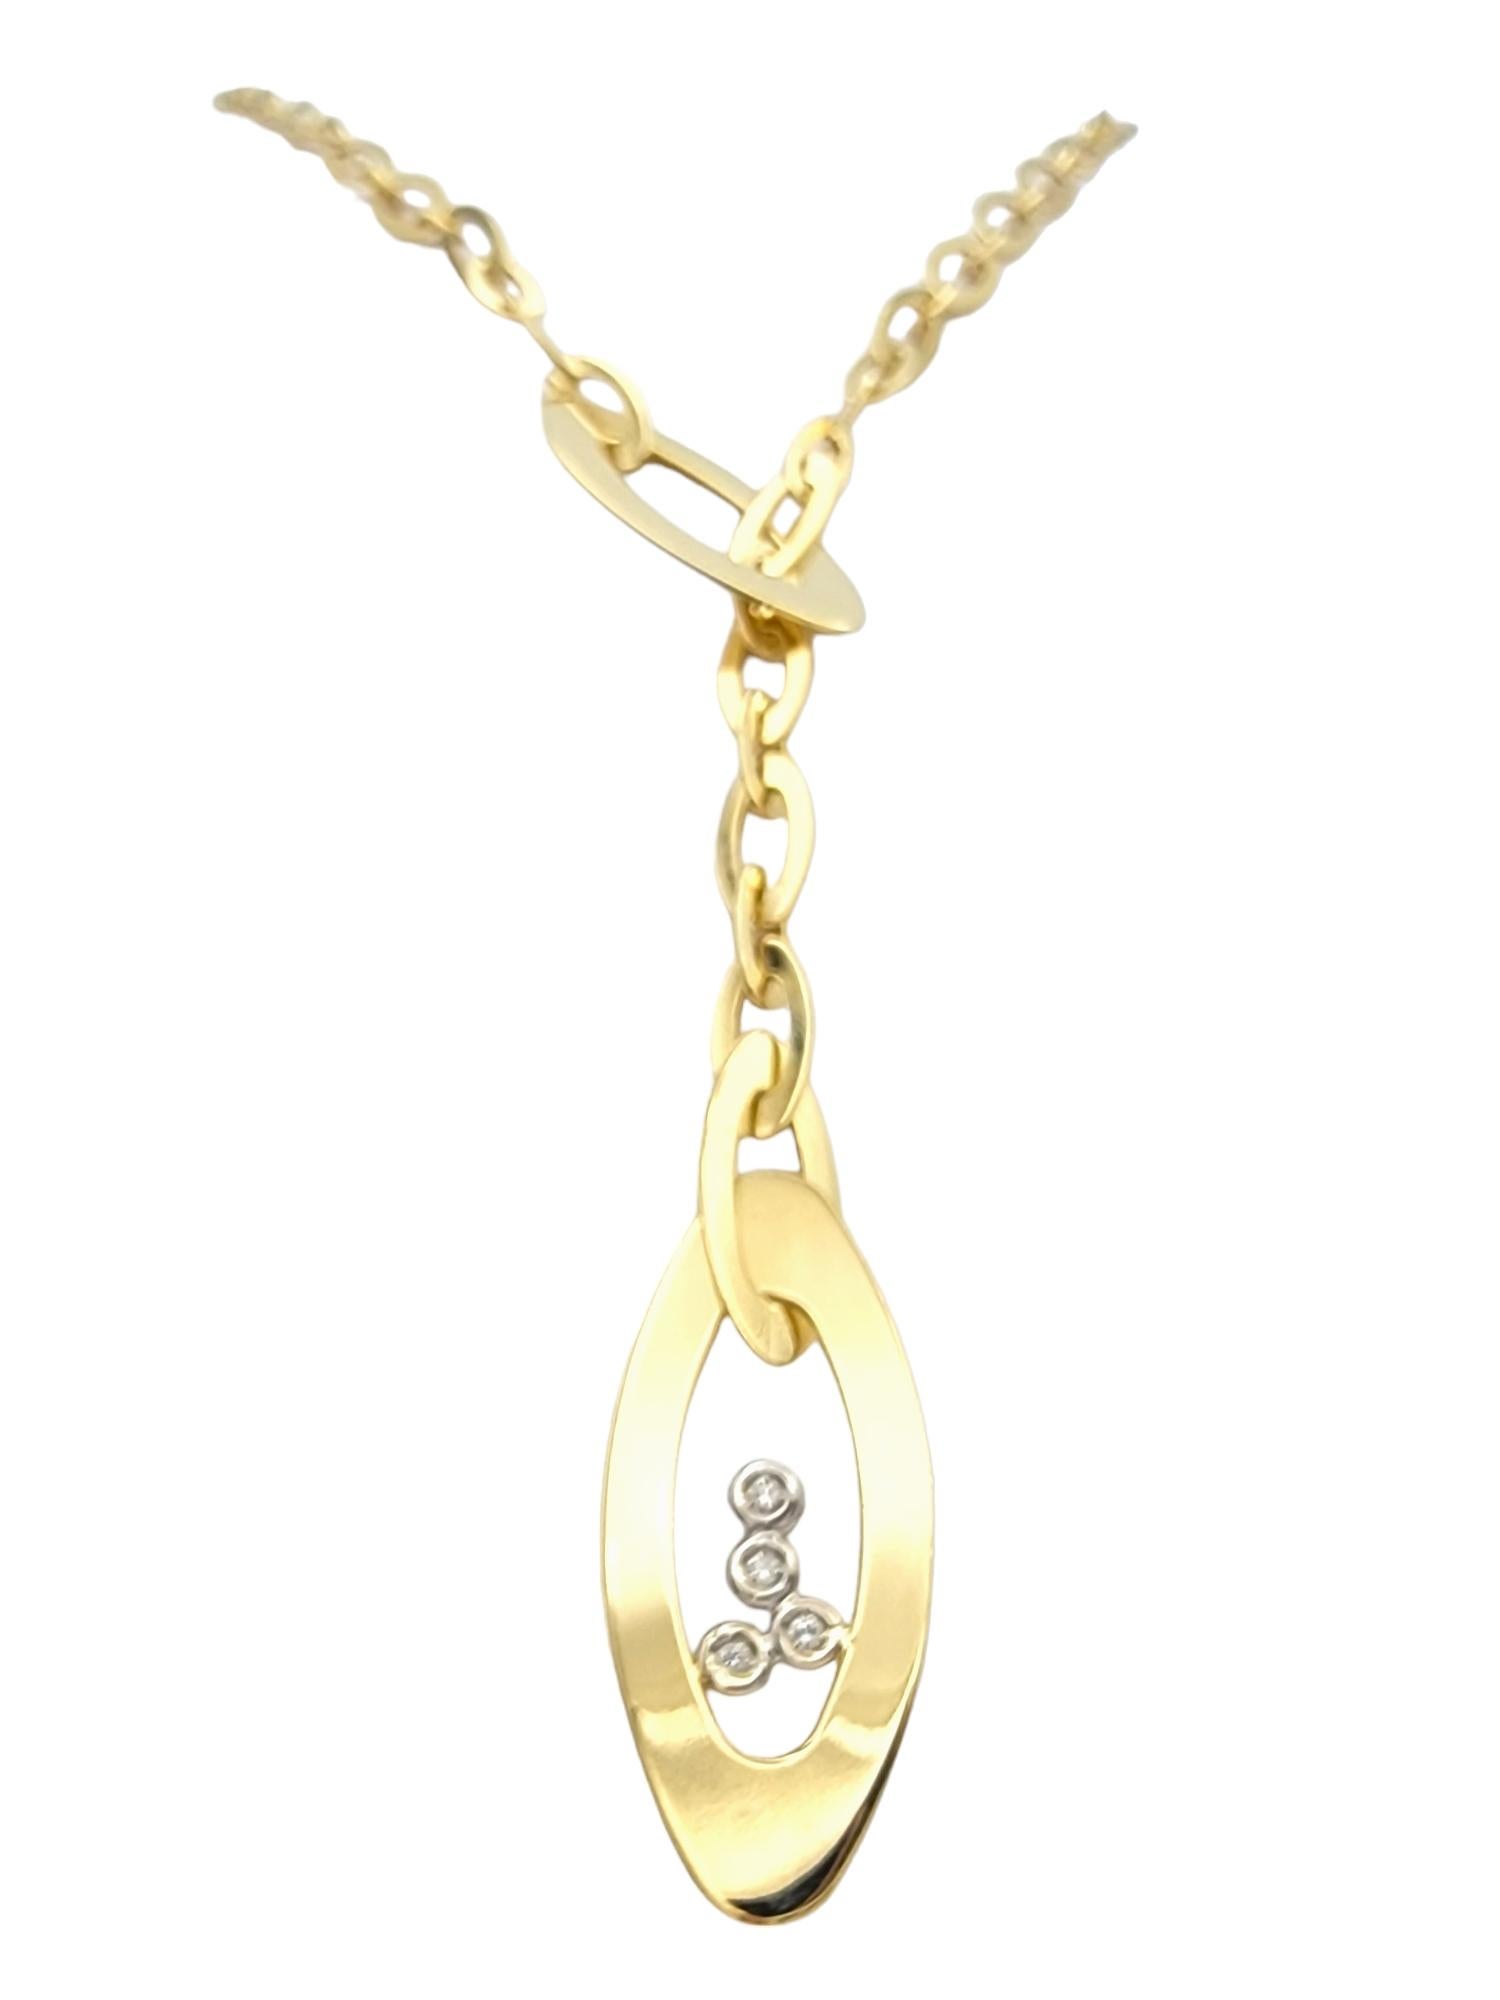 The Roberto Coin 'Chic & Shine' necklace is a stunning embodiment of sophistication and modern design. Crafted from luxurious 18-karat yellow gold, this necklace features a lariat-style pendant that exudes contemporary elegance. The uniqueness of